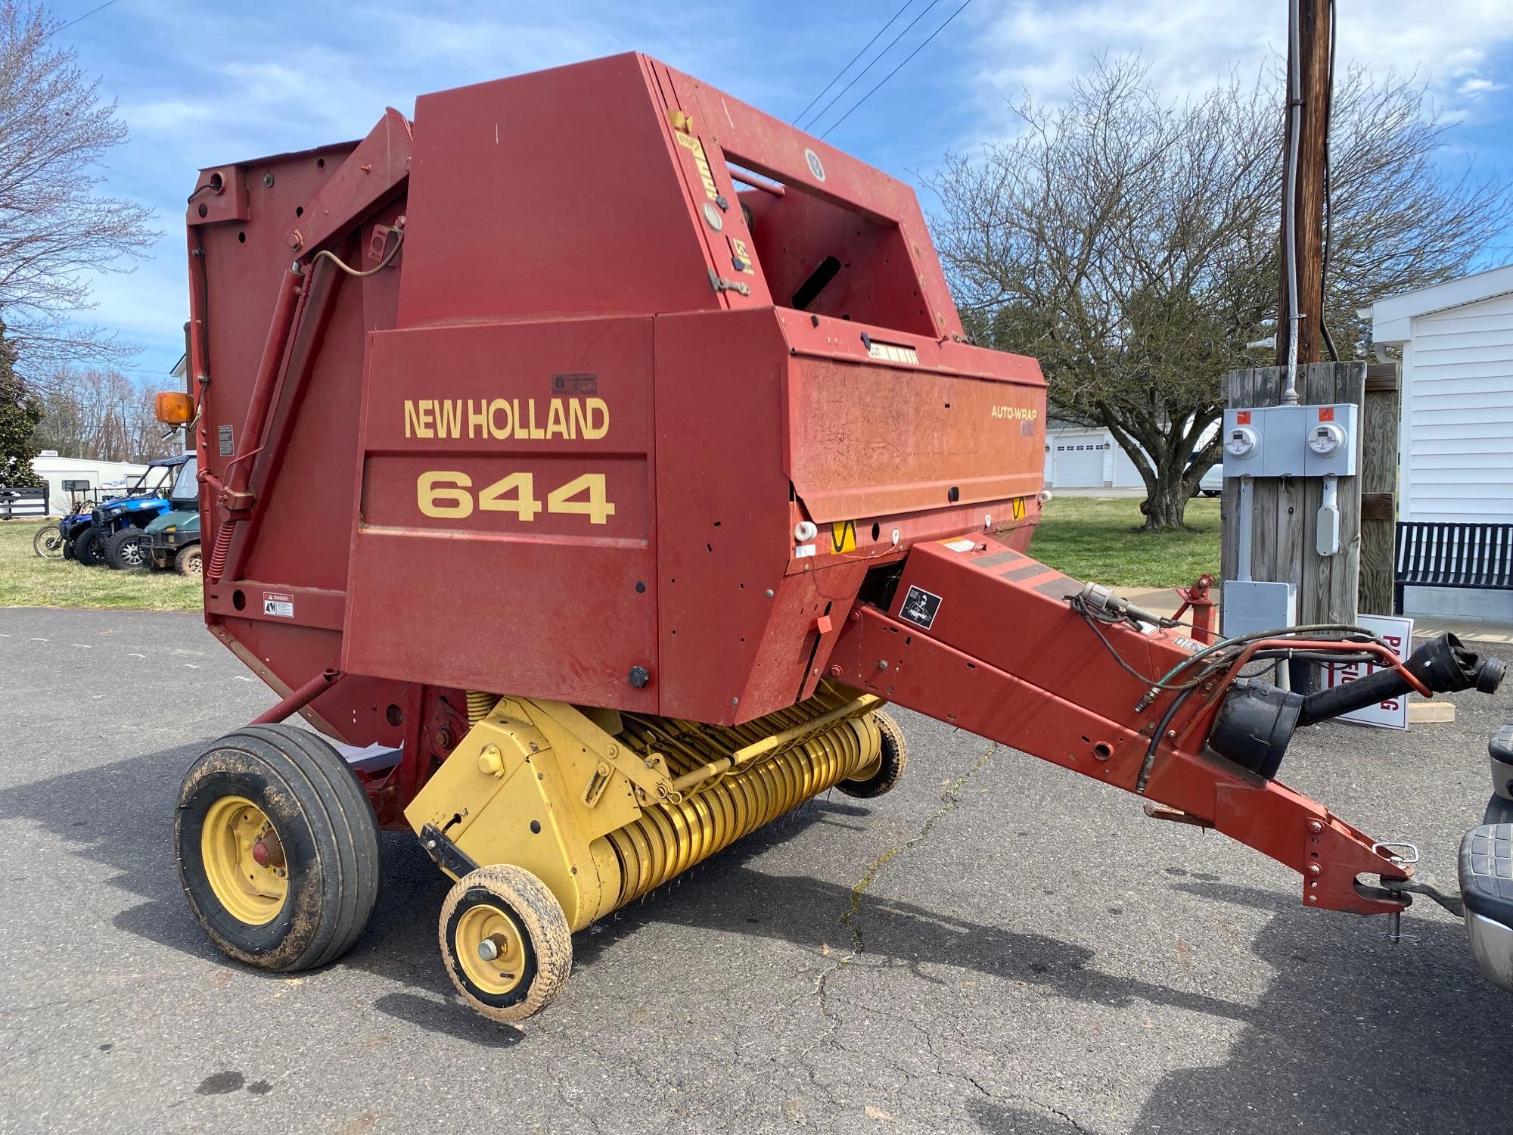 Image for New Holland 644 Baler (4x5 Bales) w/Monitor and Manual 